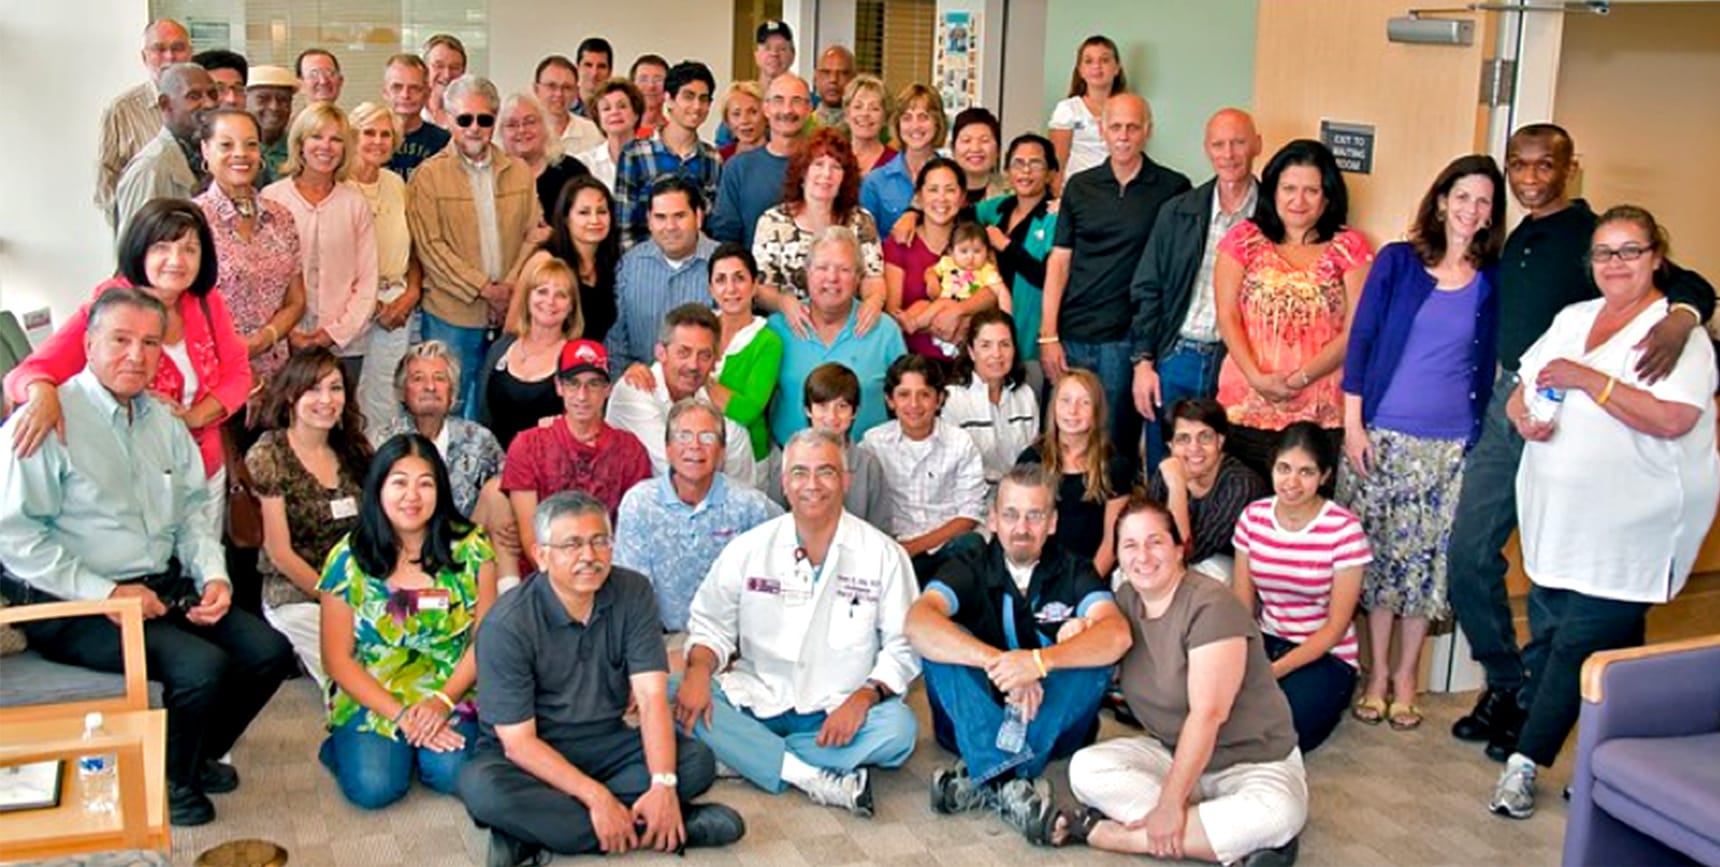 A photo of patients, family members, and clinical staff attending a meeting of the head and neck cancer support group.